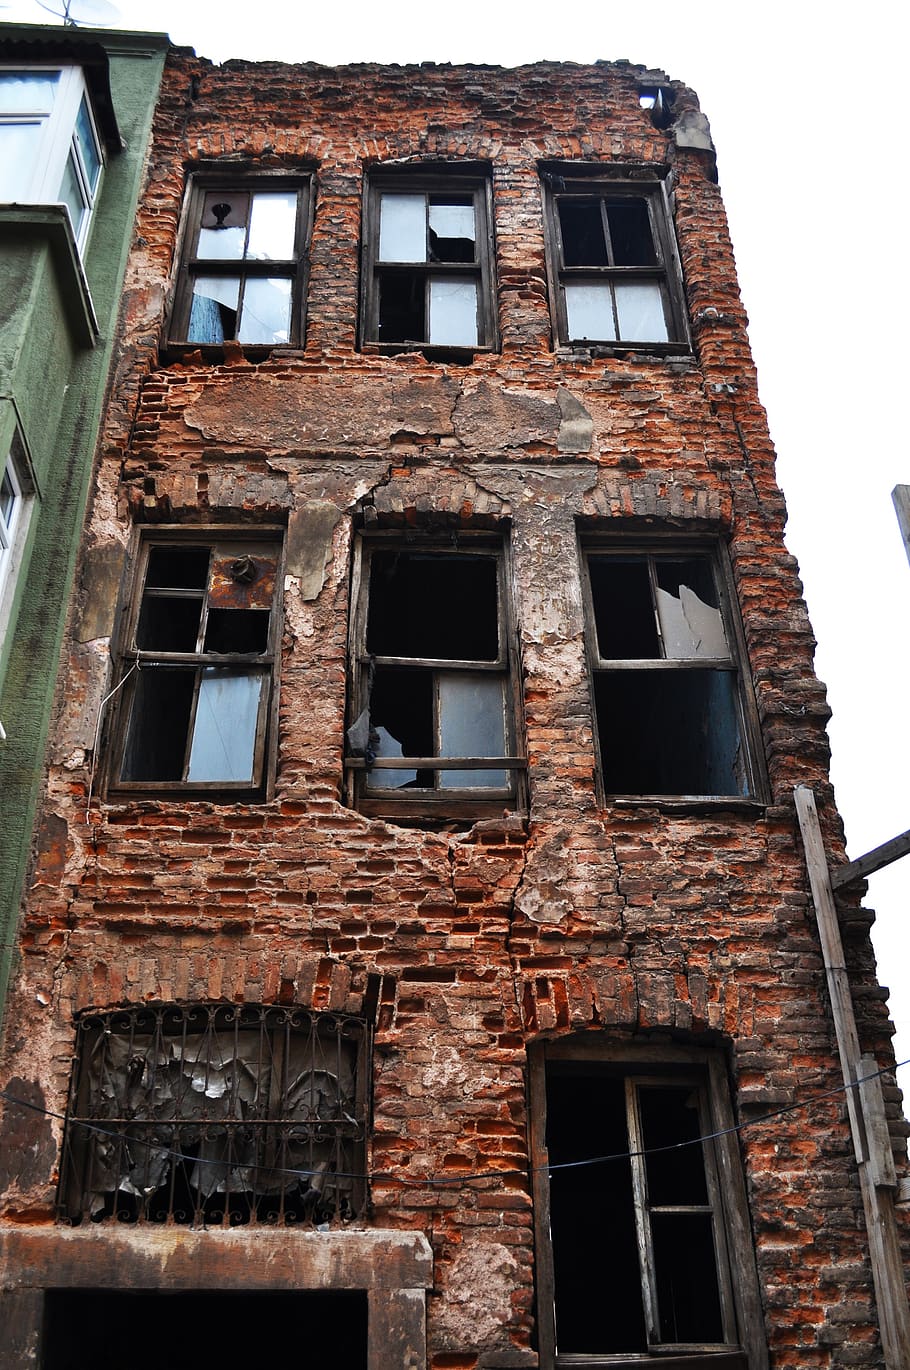 ruin, brick building, balat, window, architecture, abandoned, building exterior, built structure, low angle view, old